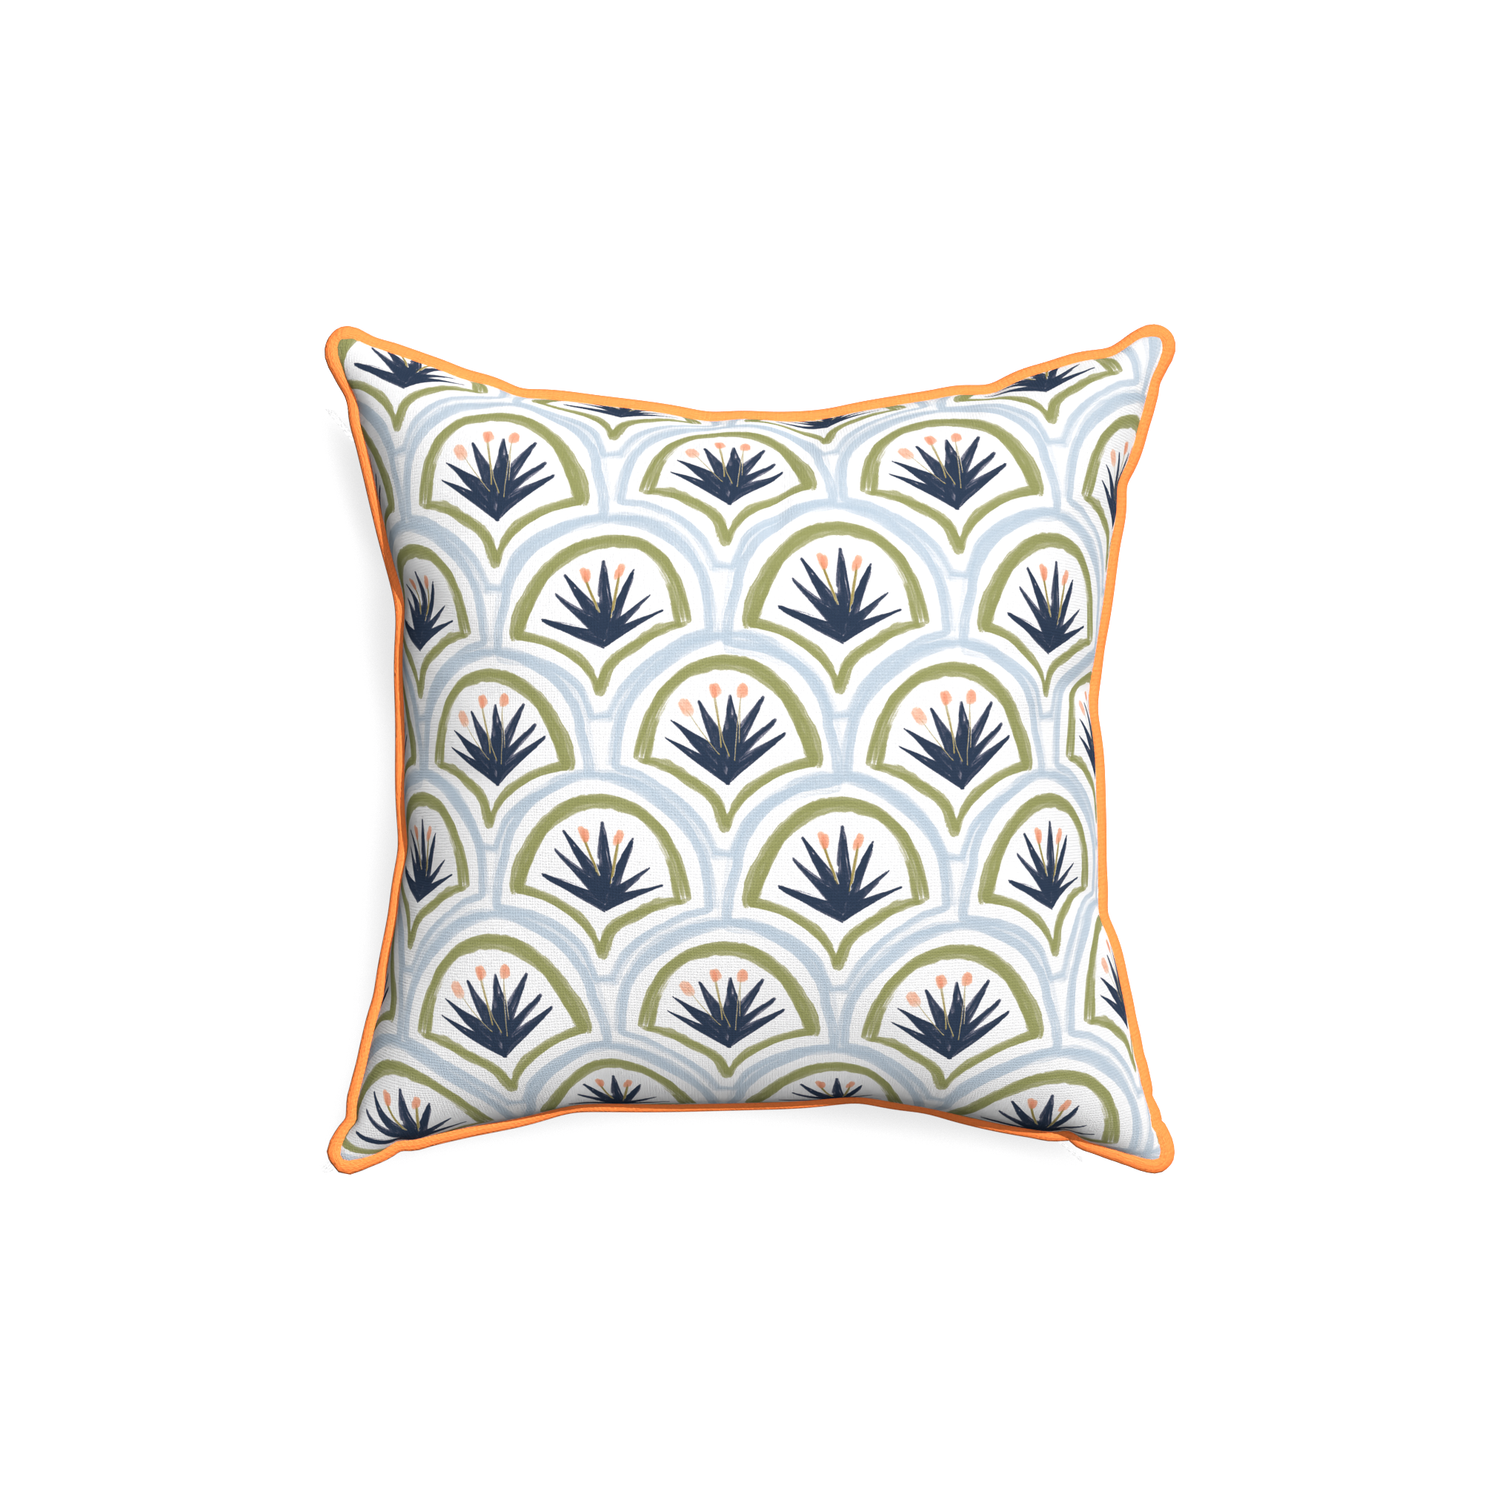 18-square thatcher midnight custom art deco palm patternpillow with clementine piping on white background